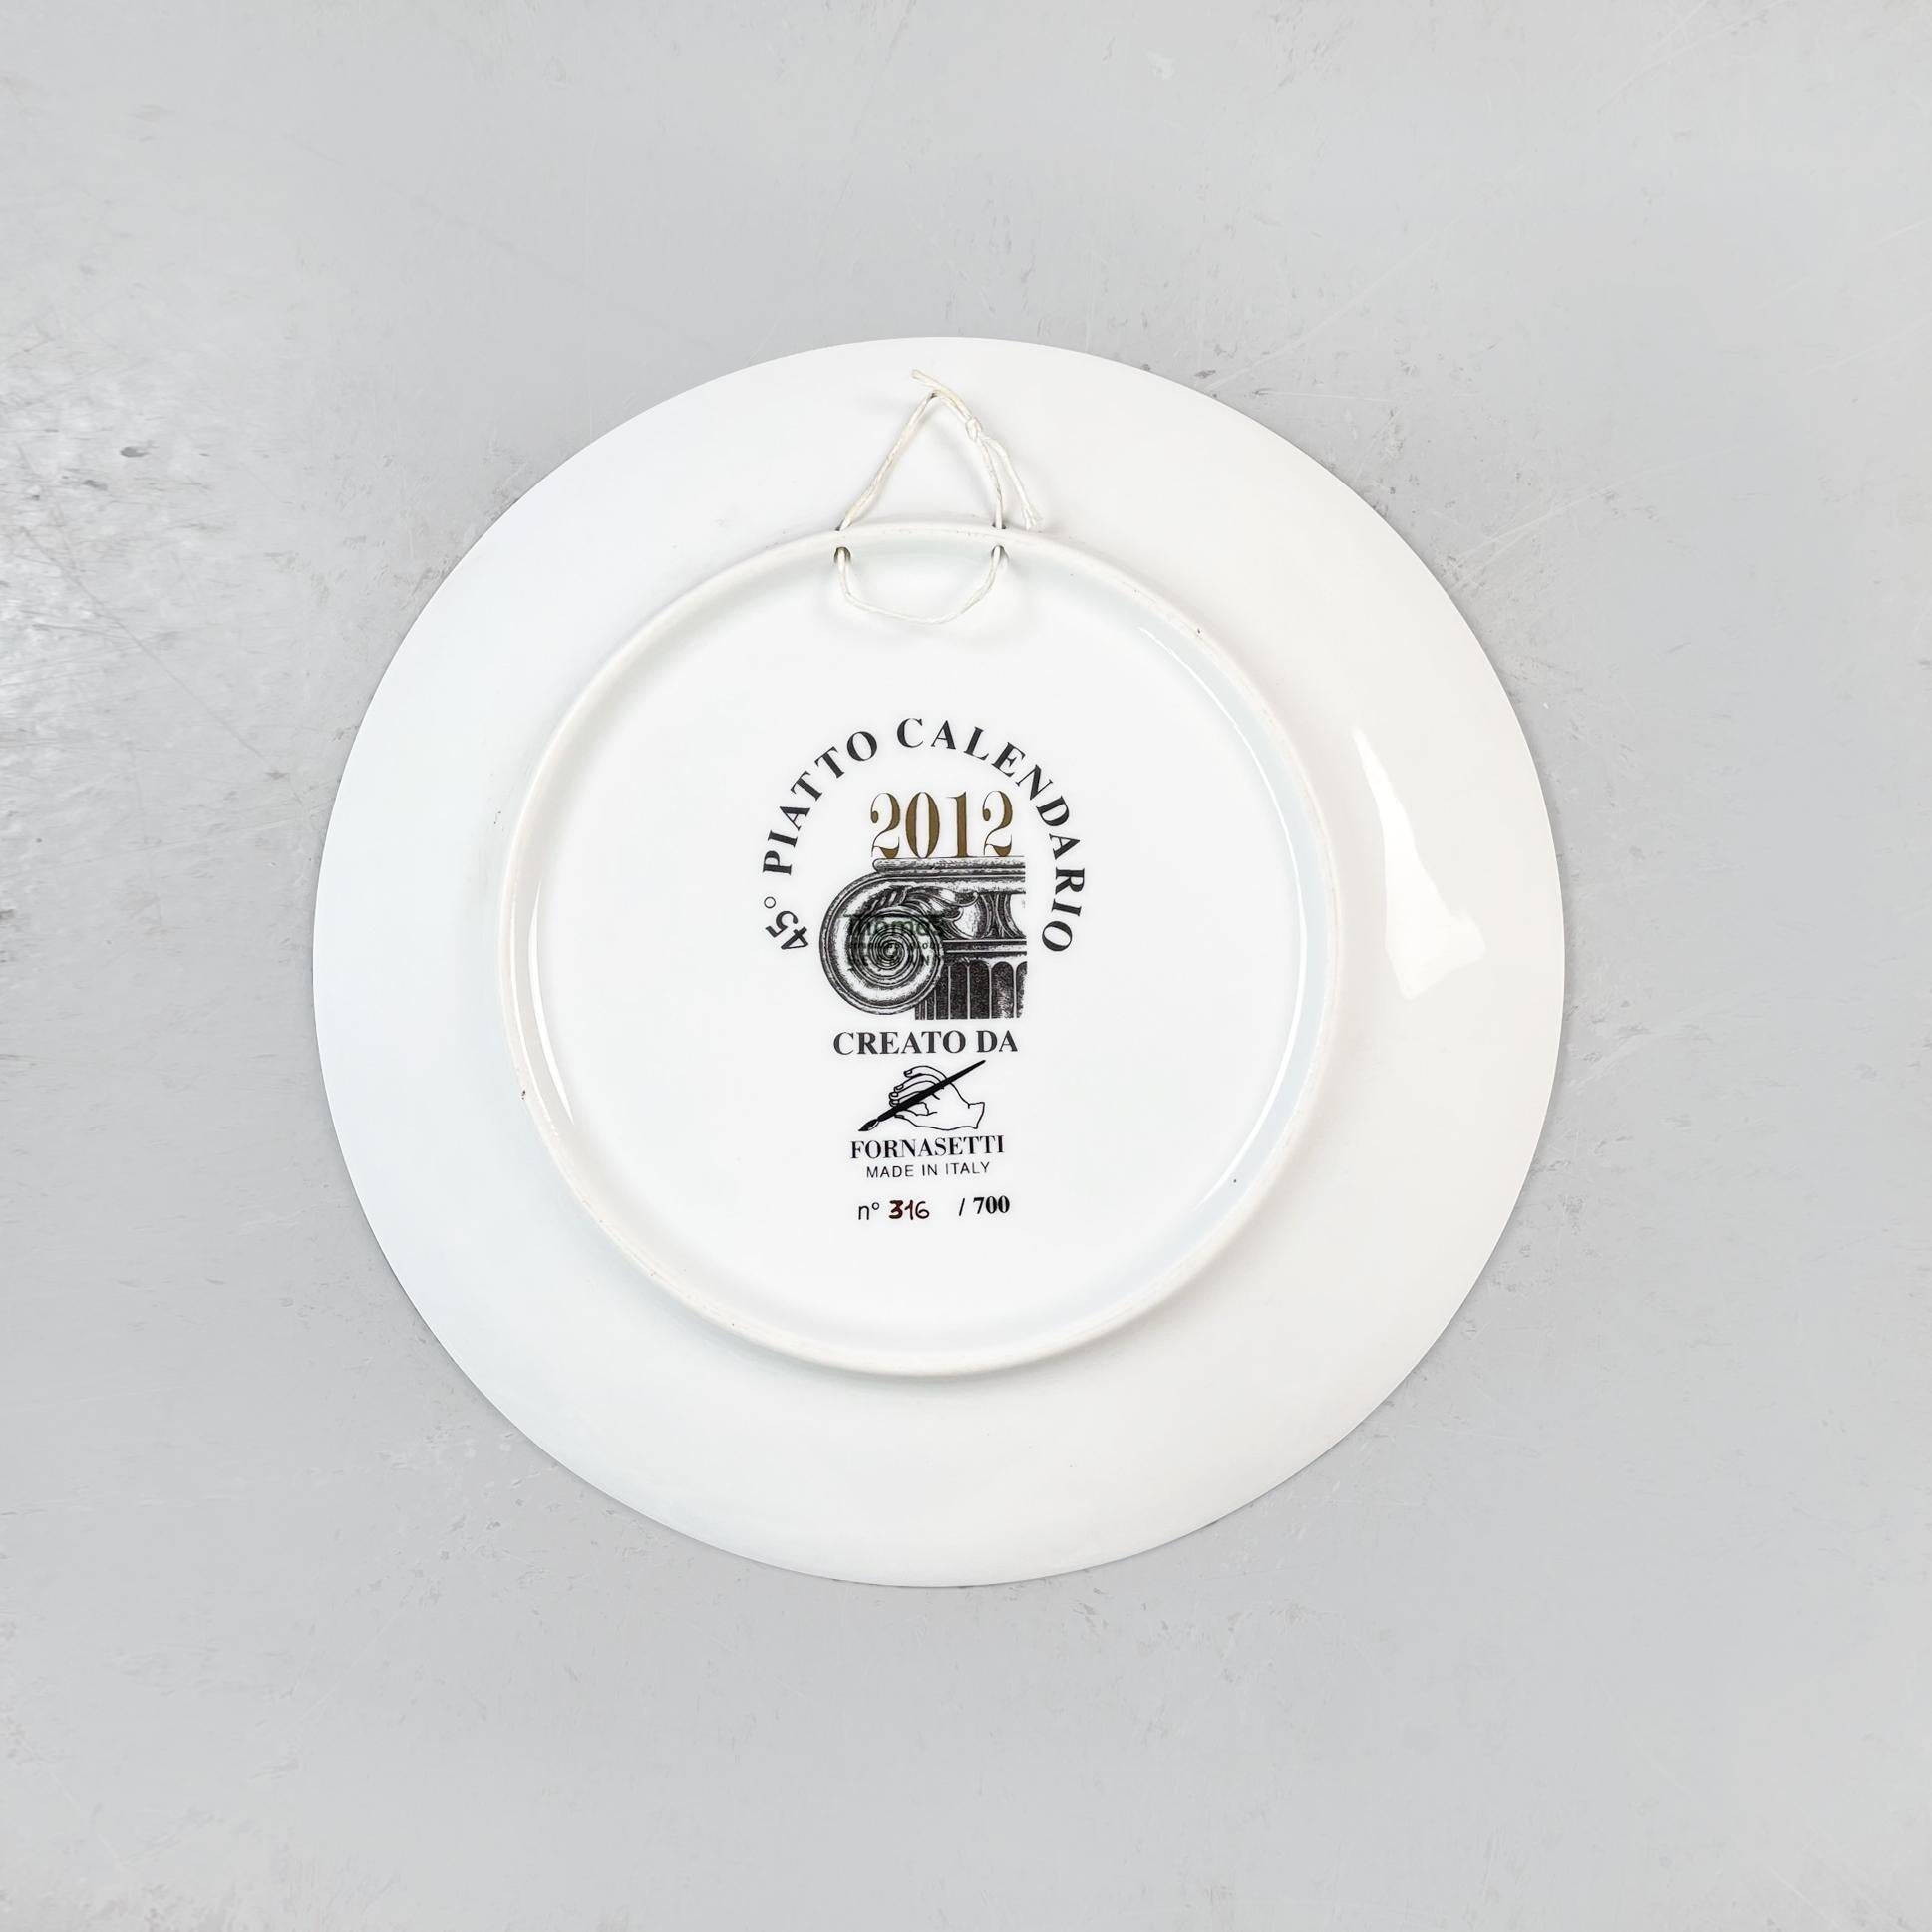 Contemporary Italian Post-Modern Ceramic Wall Calendar Plate 2012 by Fornasetti, 2012 For Sale